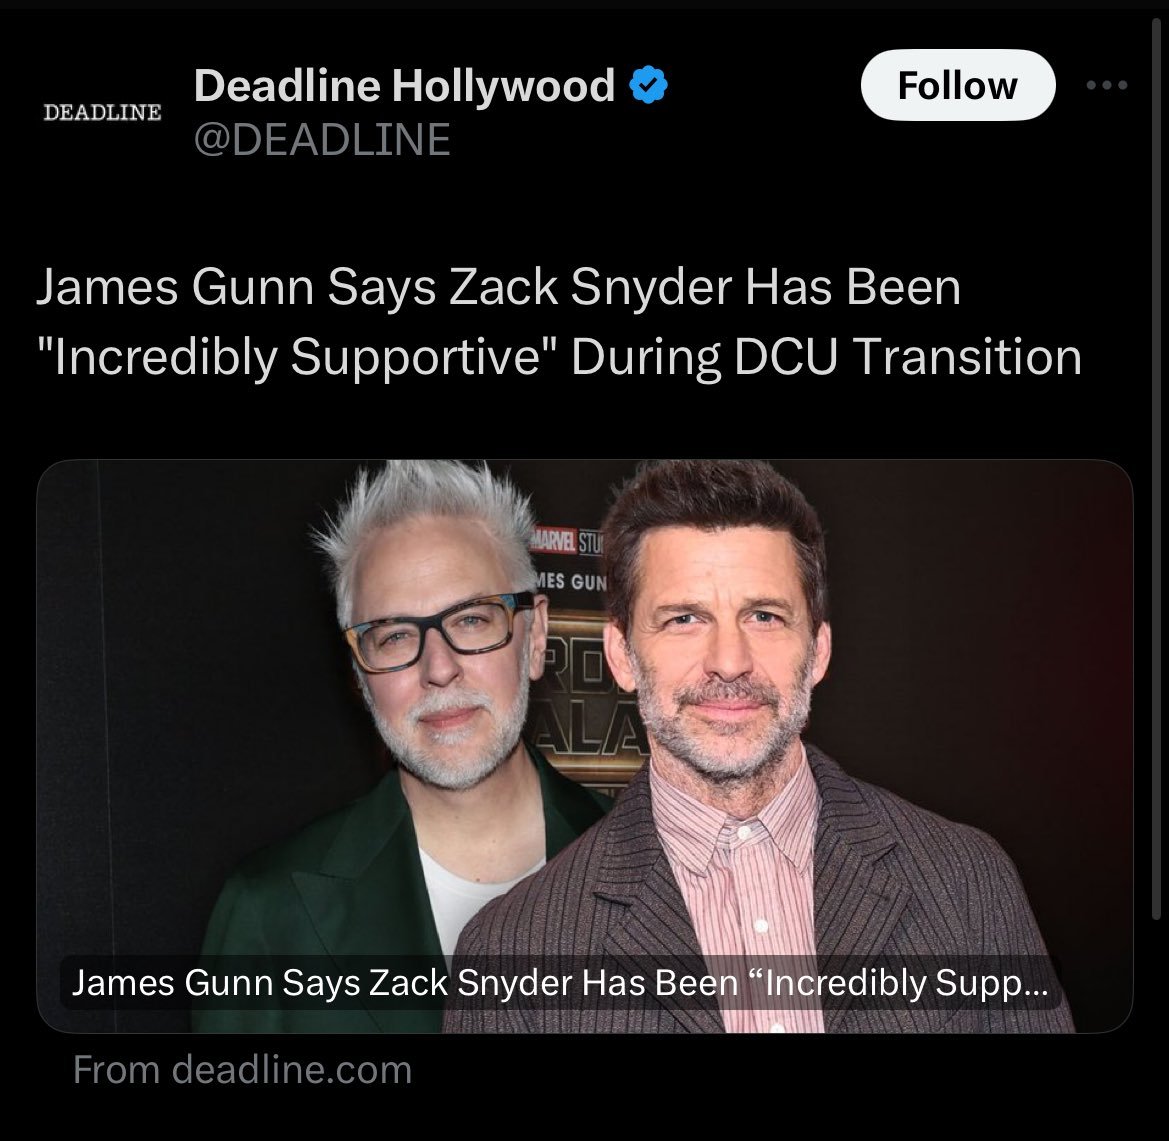 Okay so can the blogger fanboys and WB shills stop review bombing Zack's movies now that he gave Jimmy a gold star? Can you guys fuck off now?